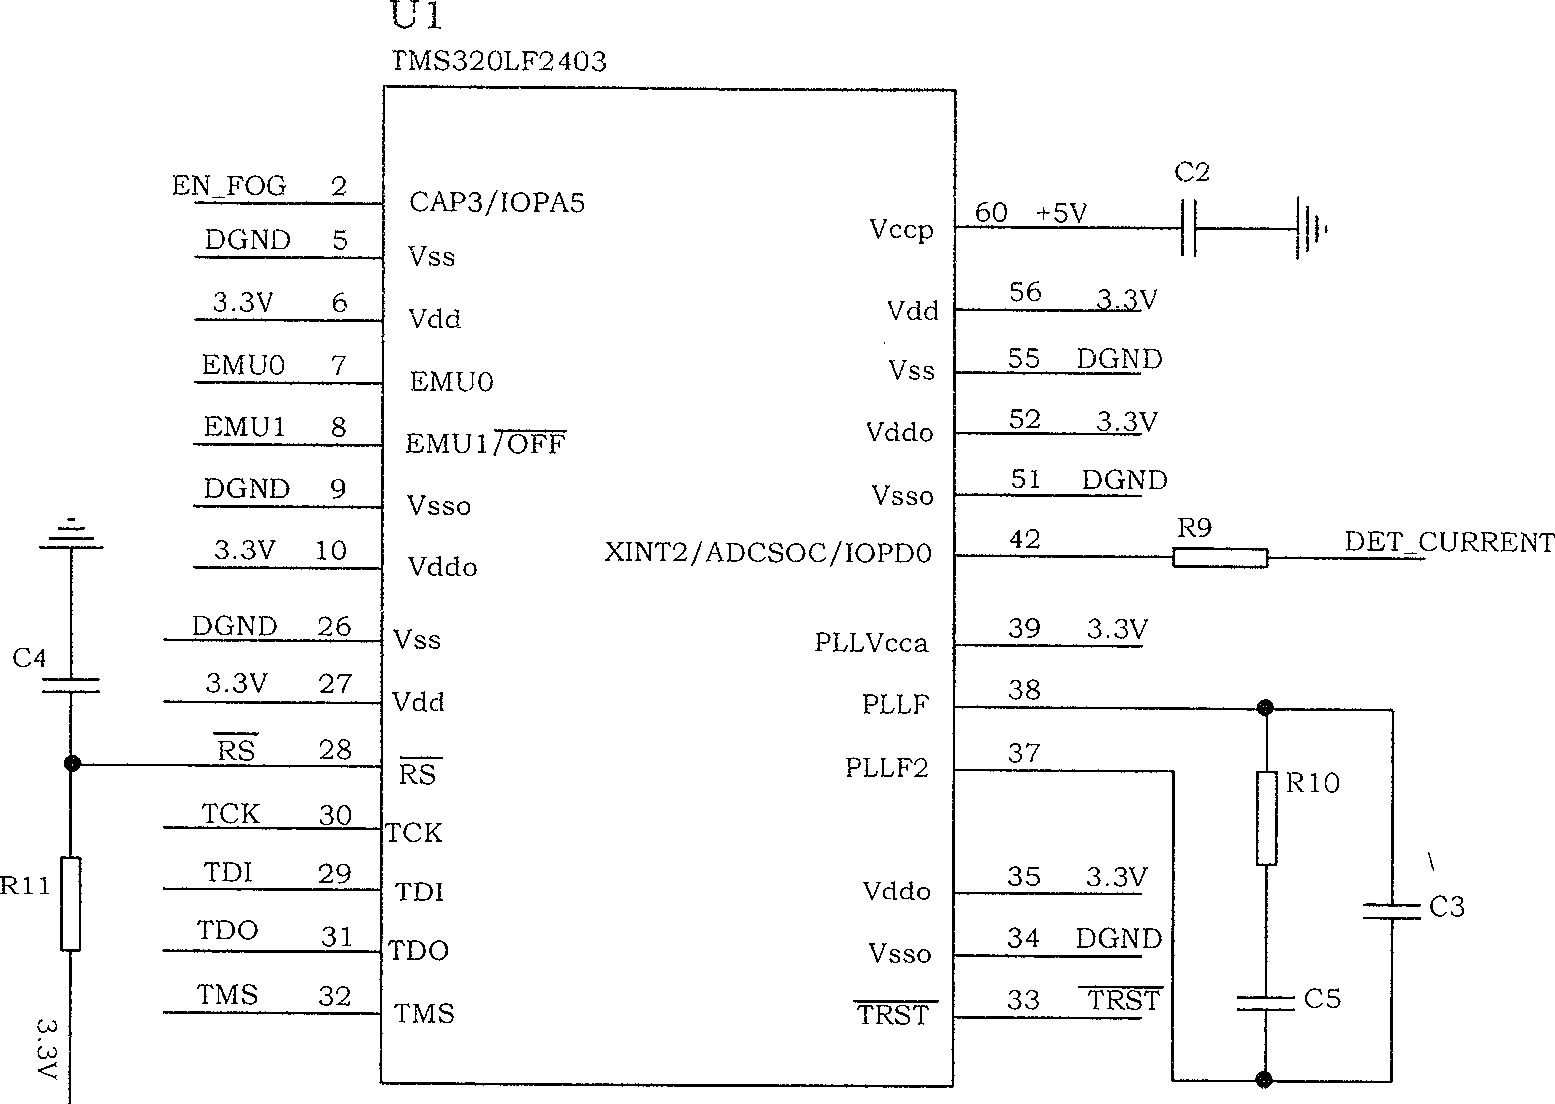 Latch fault detection circuit suitable for satellite microprocessor